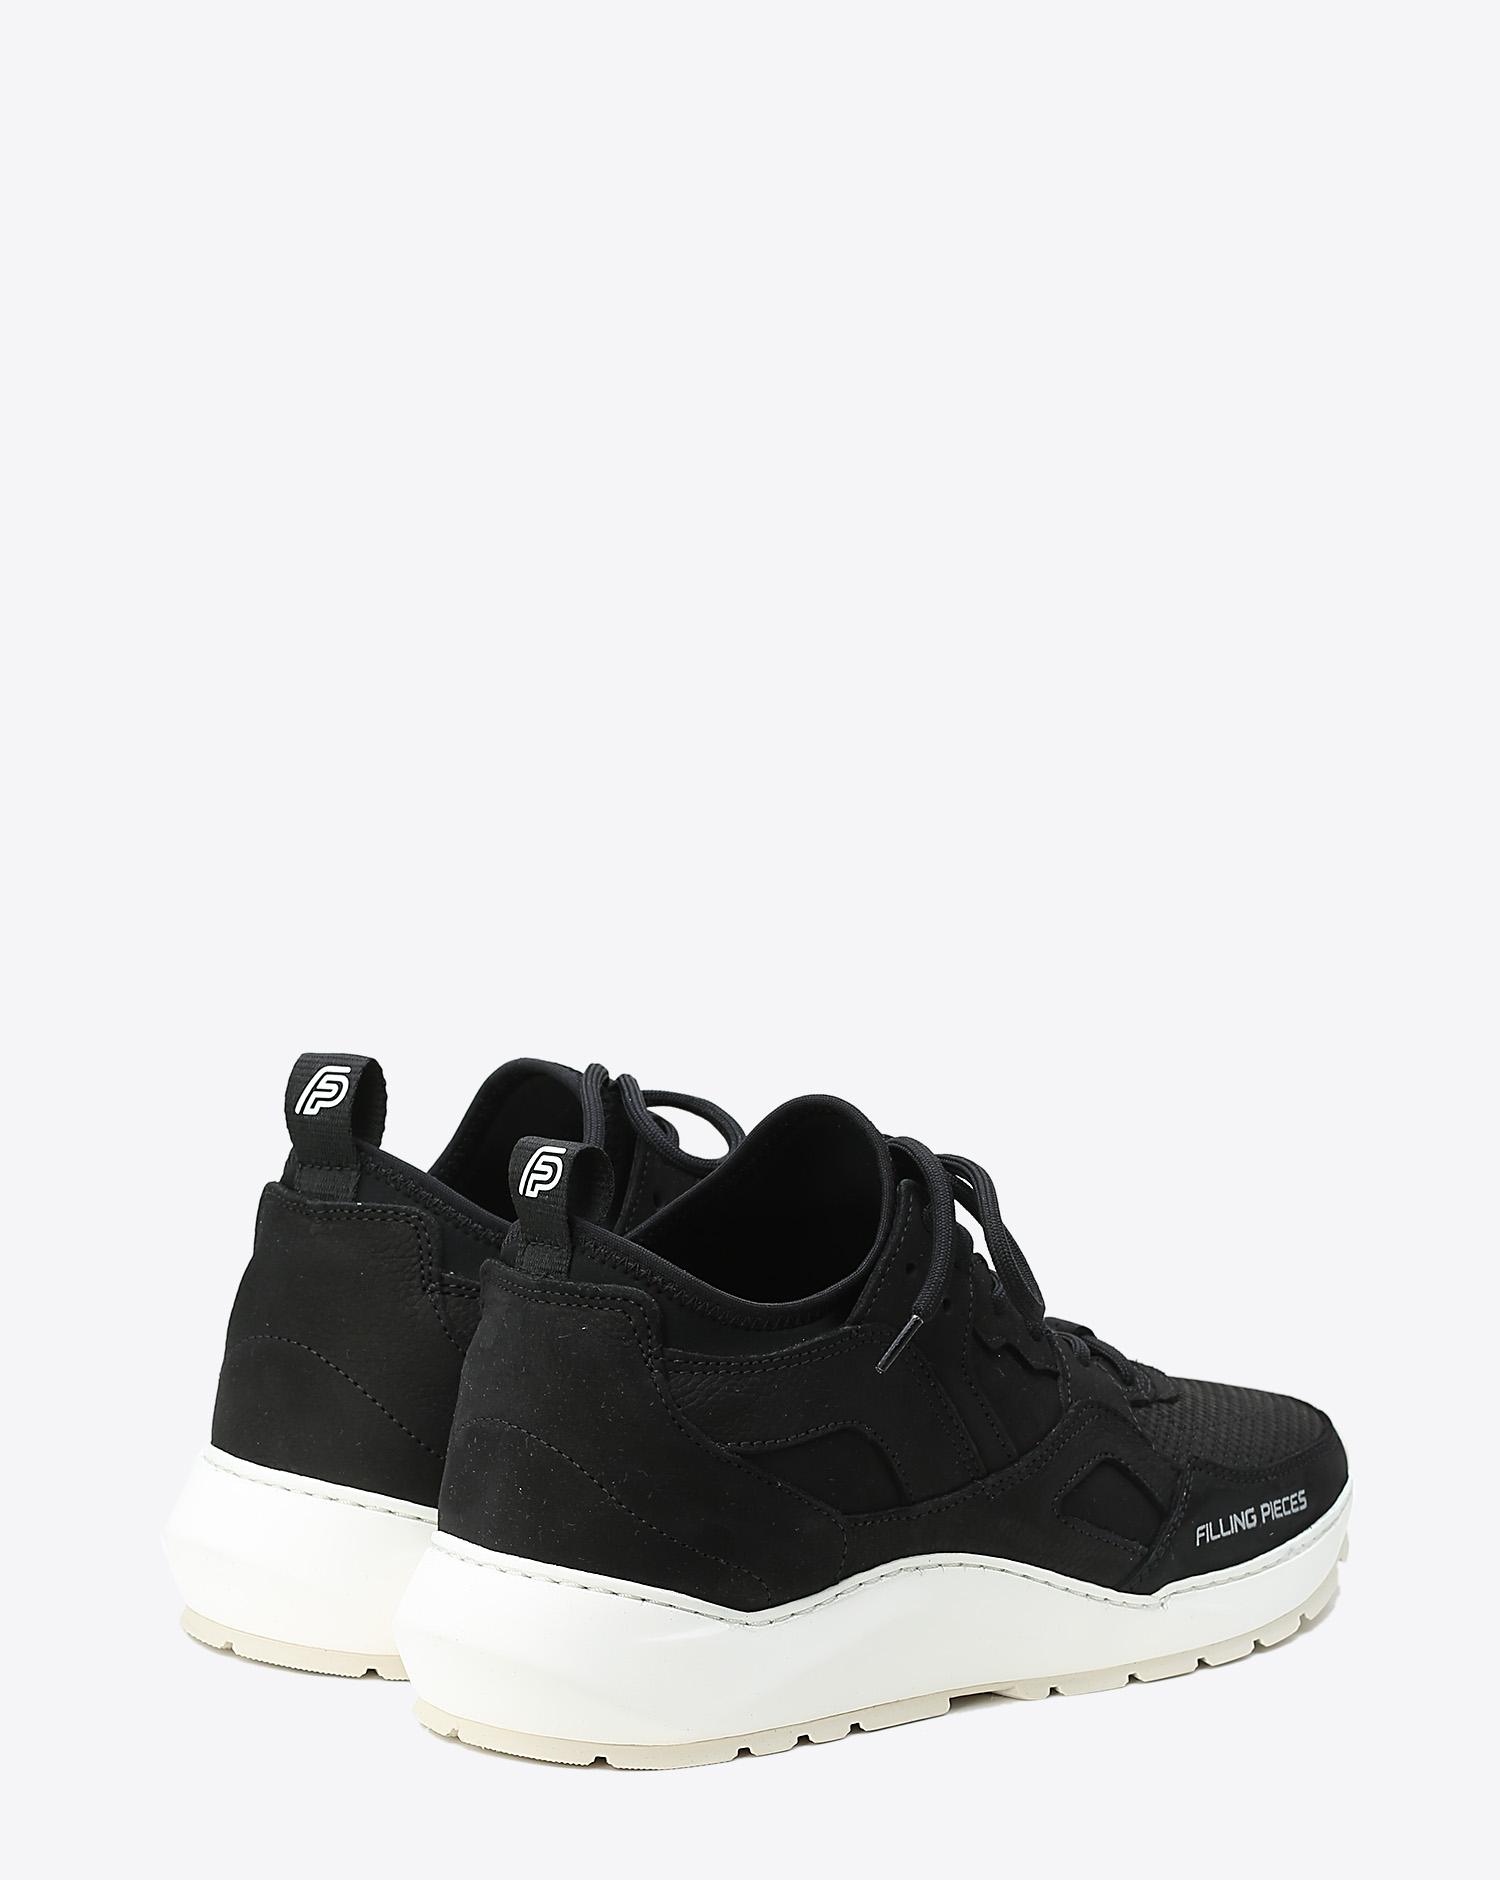 Filling Pieces Sneakers Fence Origin Low Arch Runner Fence All Black Black